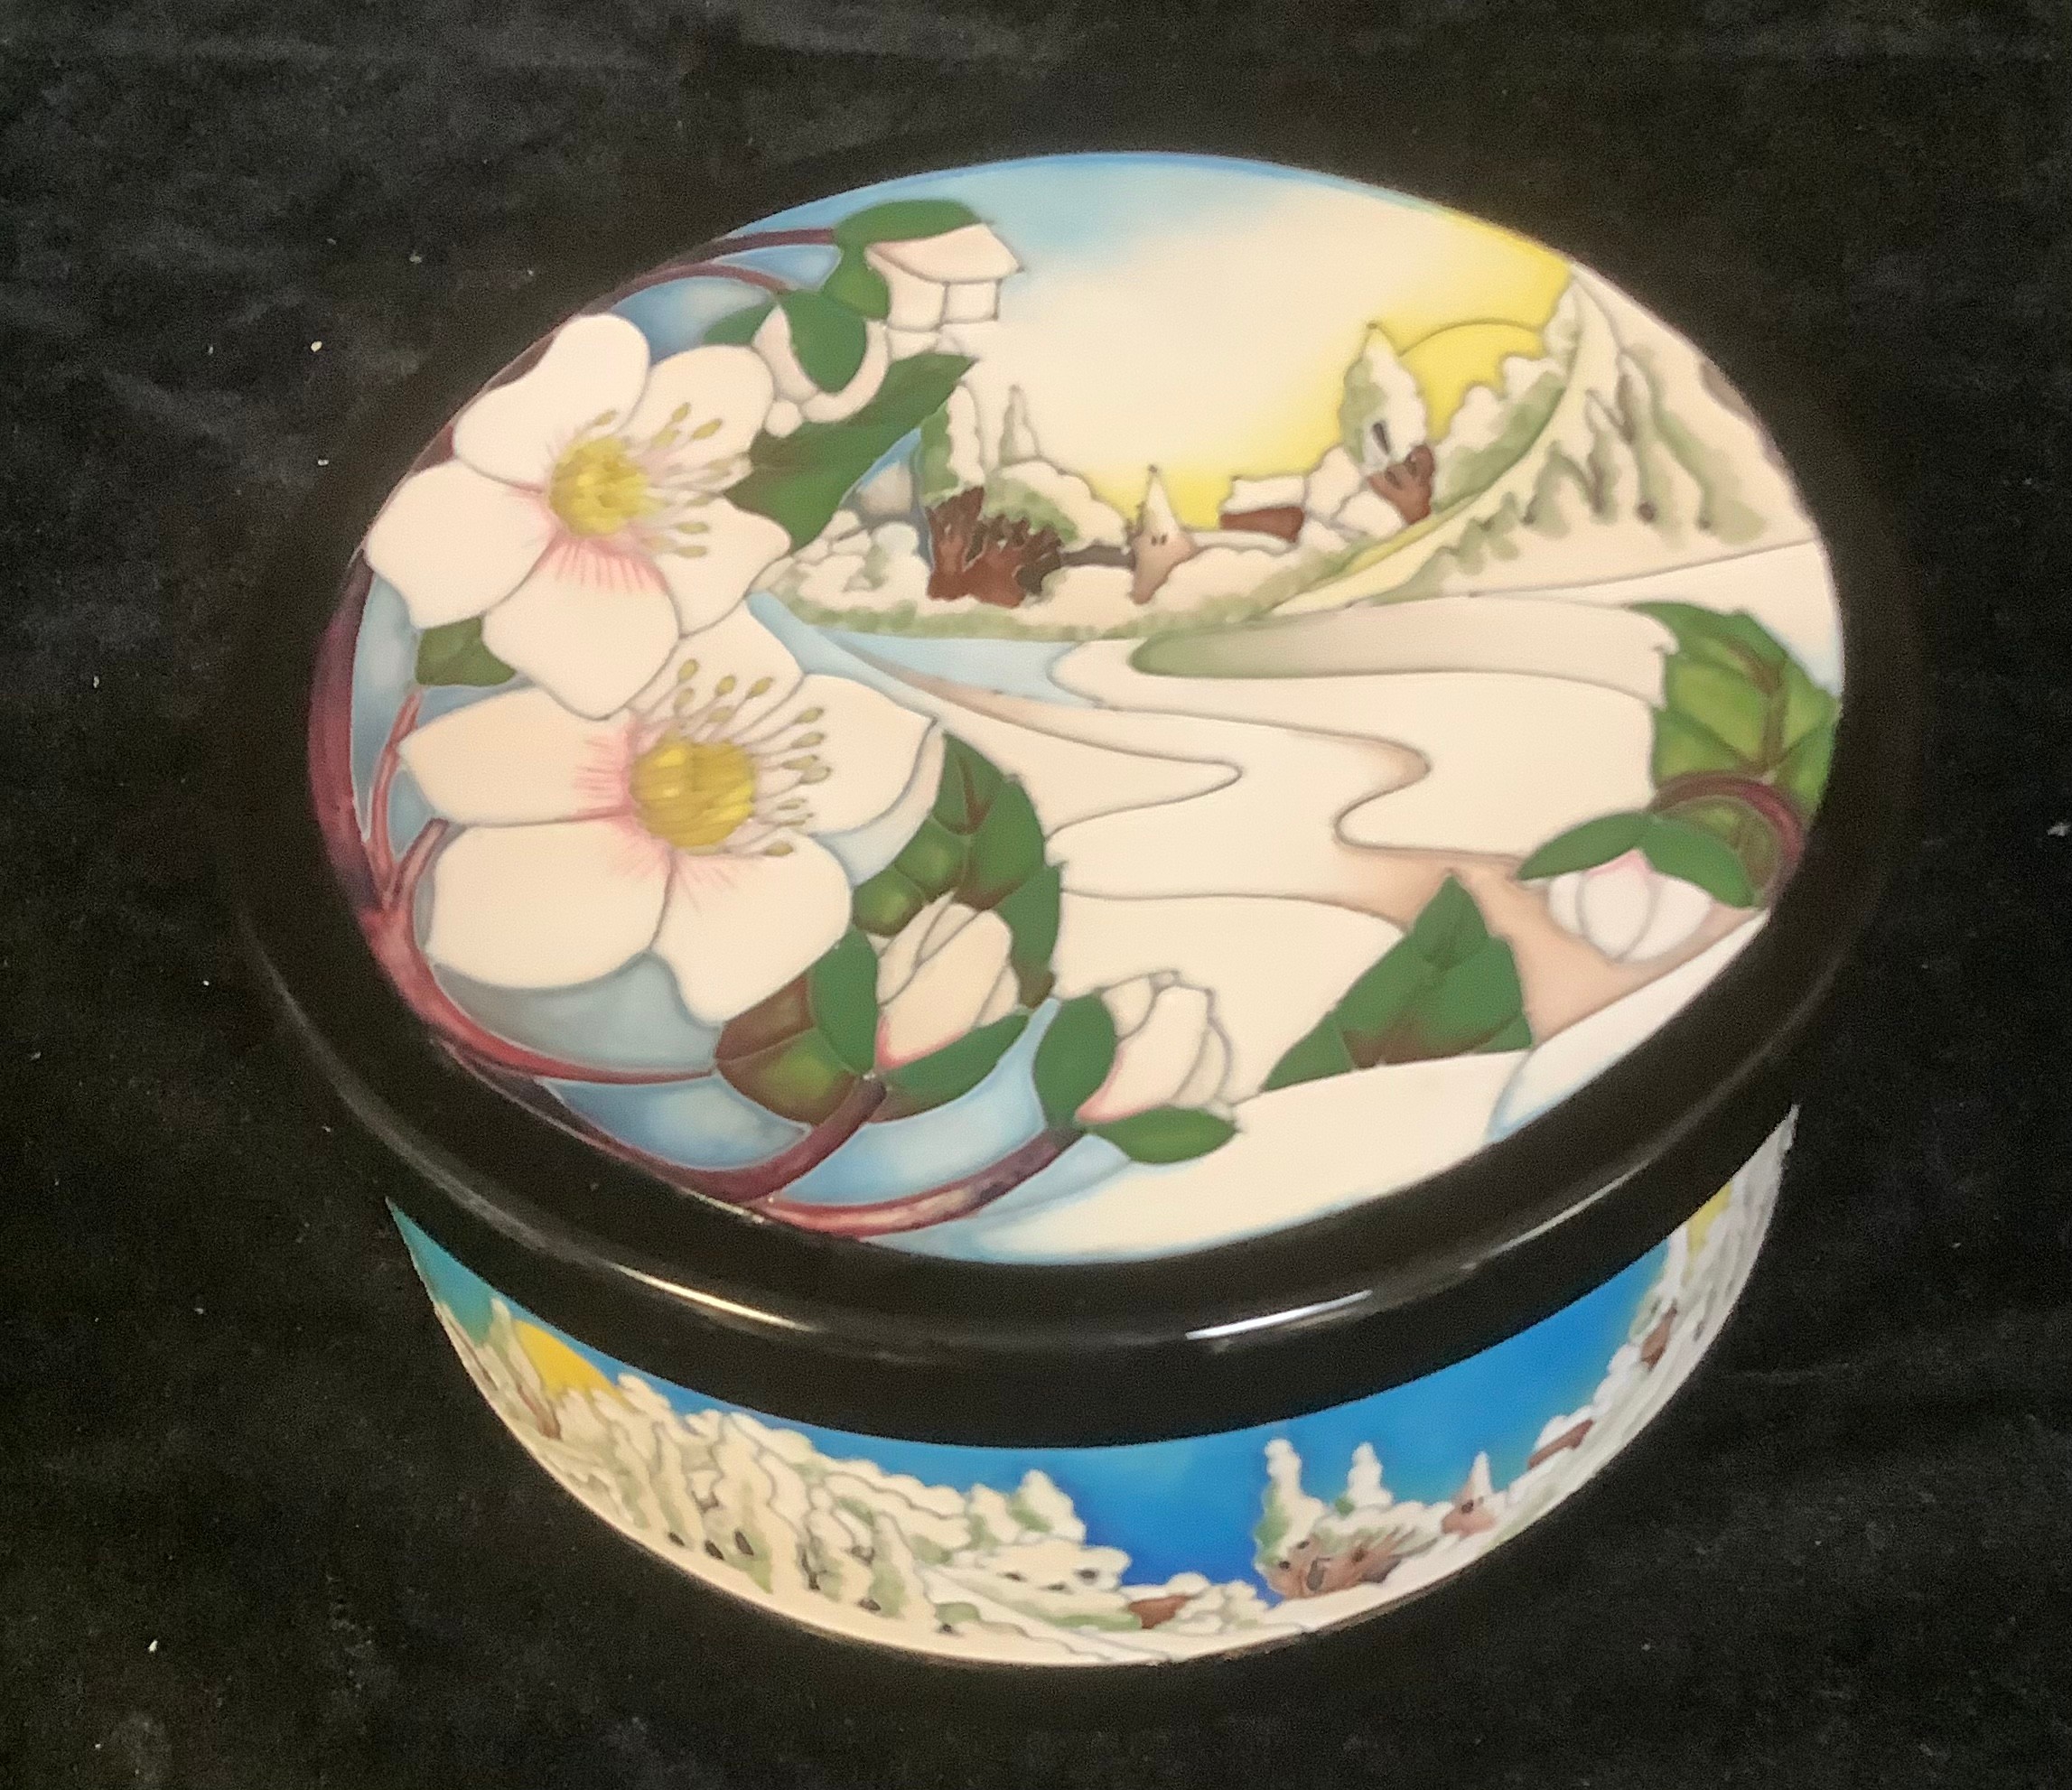 A Moorcroft circular bowl and cover, December Dawn pattern, tube lined with winter scene, designed